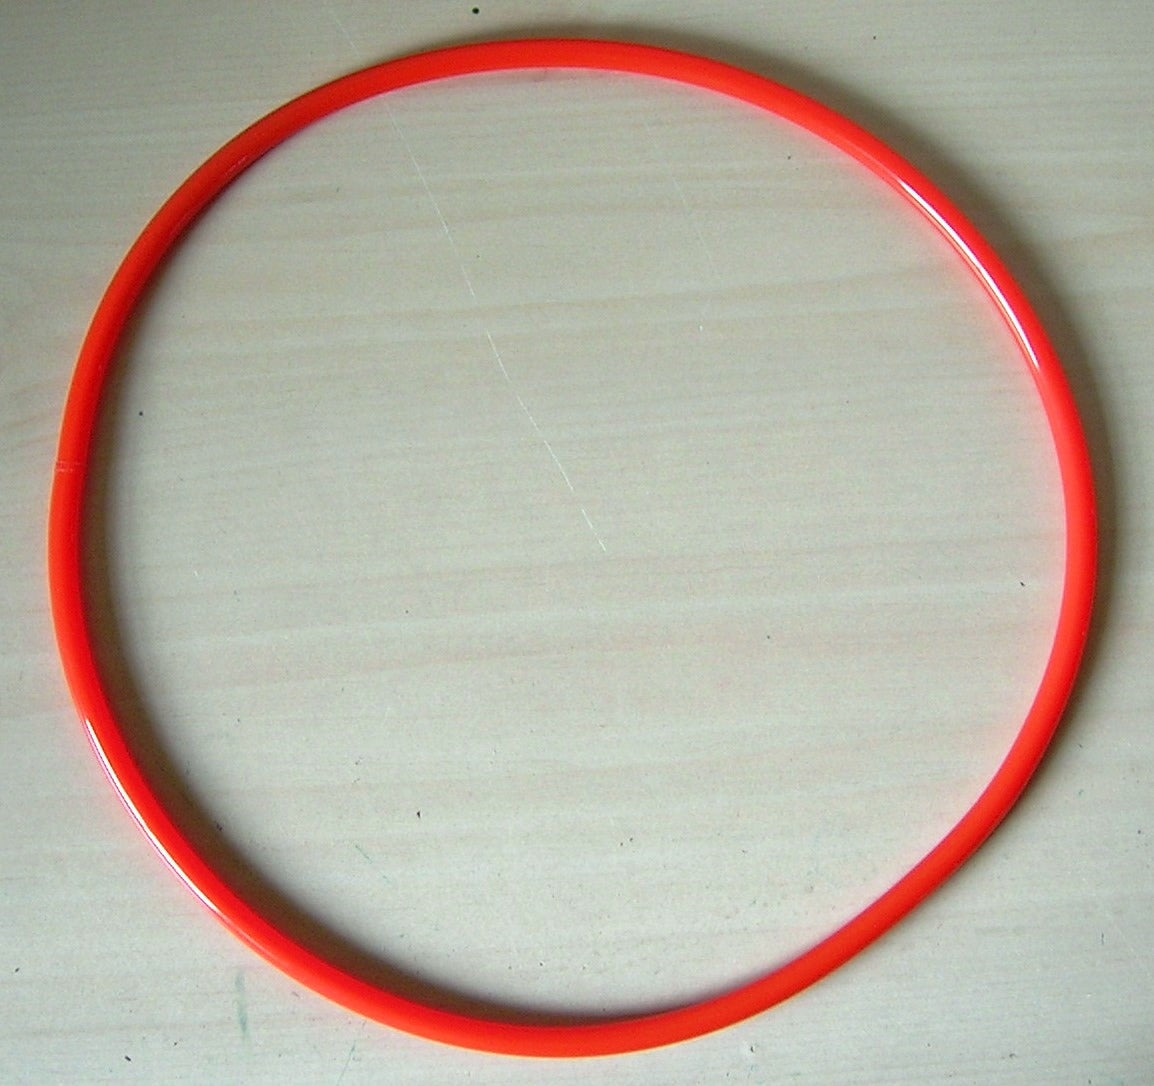 Replacement Round Drive BELT for DURACRAFT 20314 3 Wheel BAND SAW